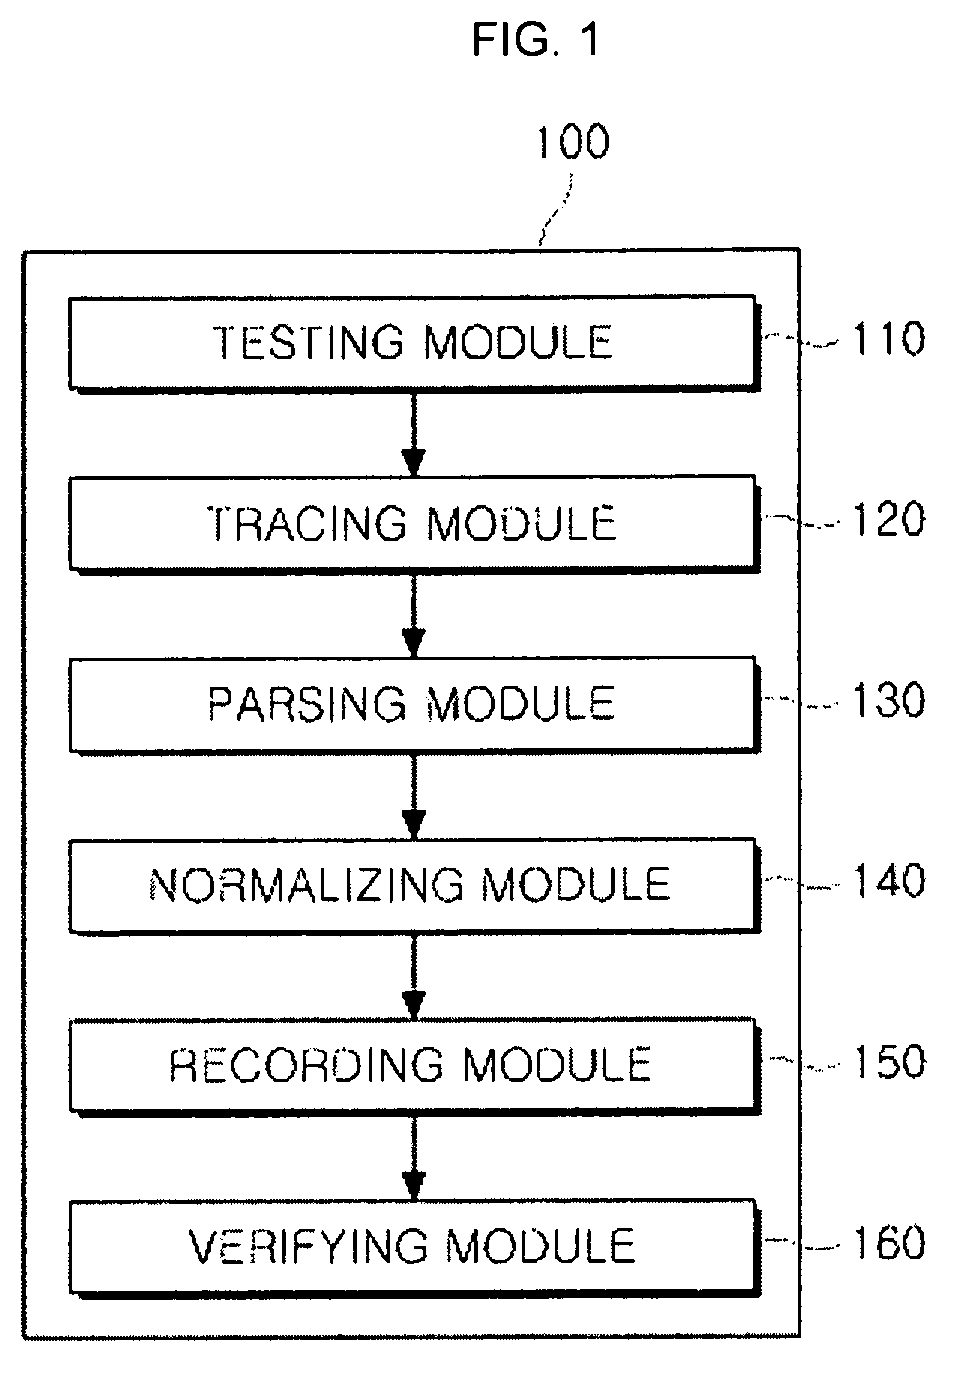 Apparatus and method for automatically generating SELinux security policy based on selt